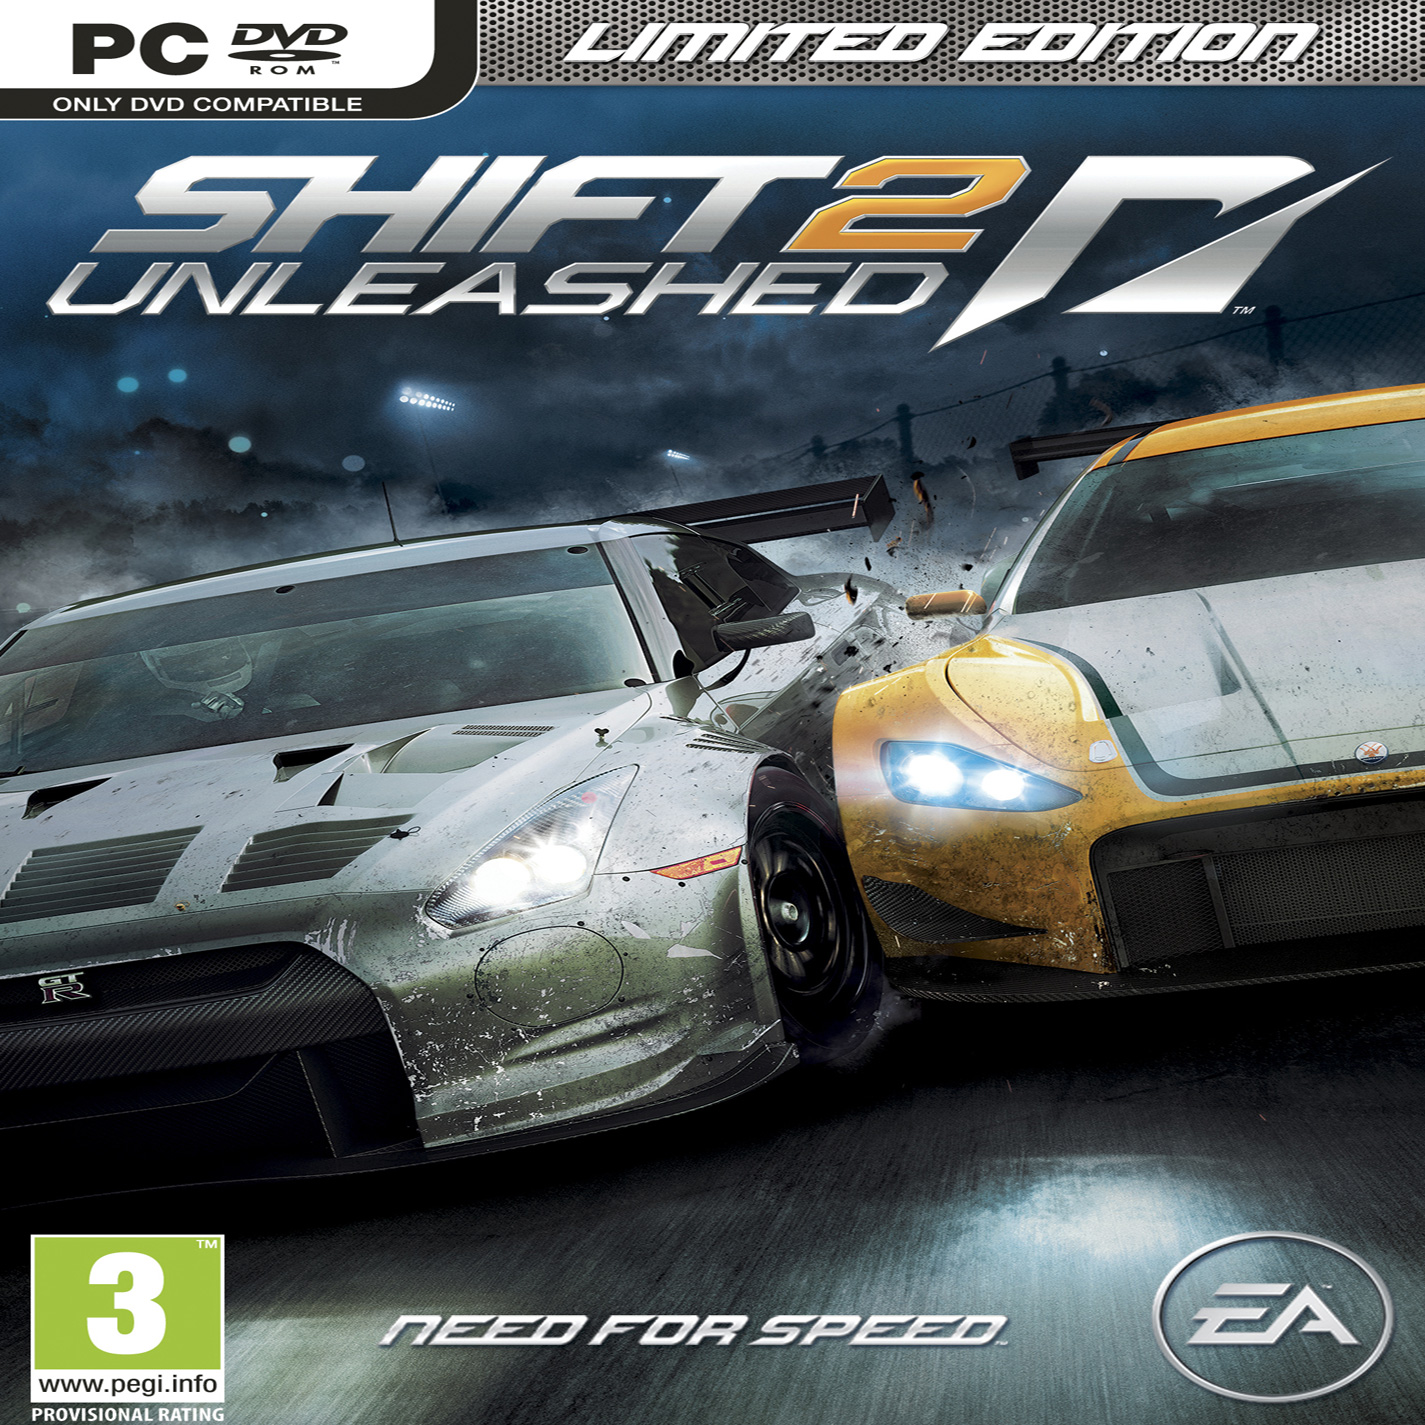 Need for Speed Shift 2: Unleashed - pedn CD obal 2